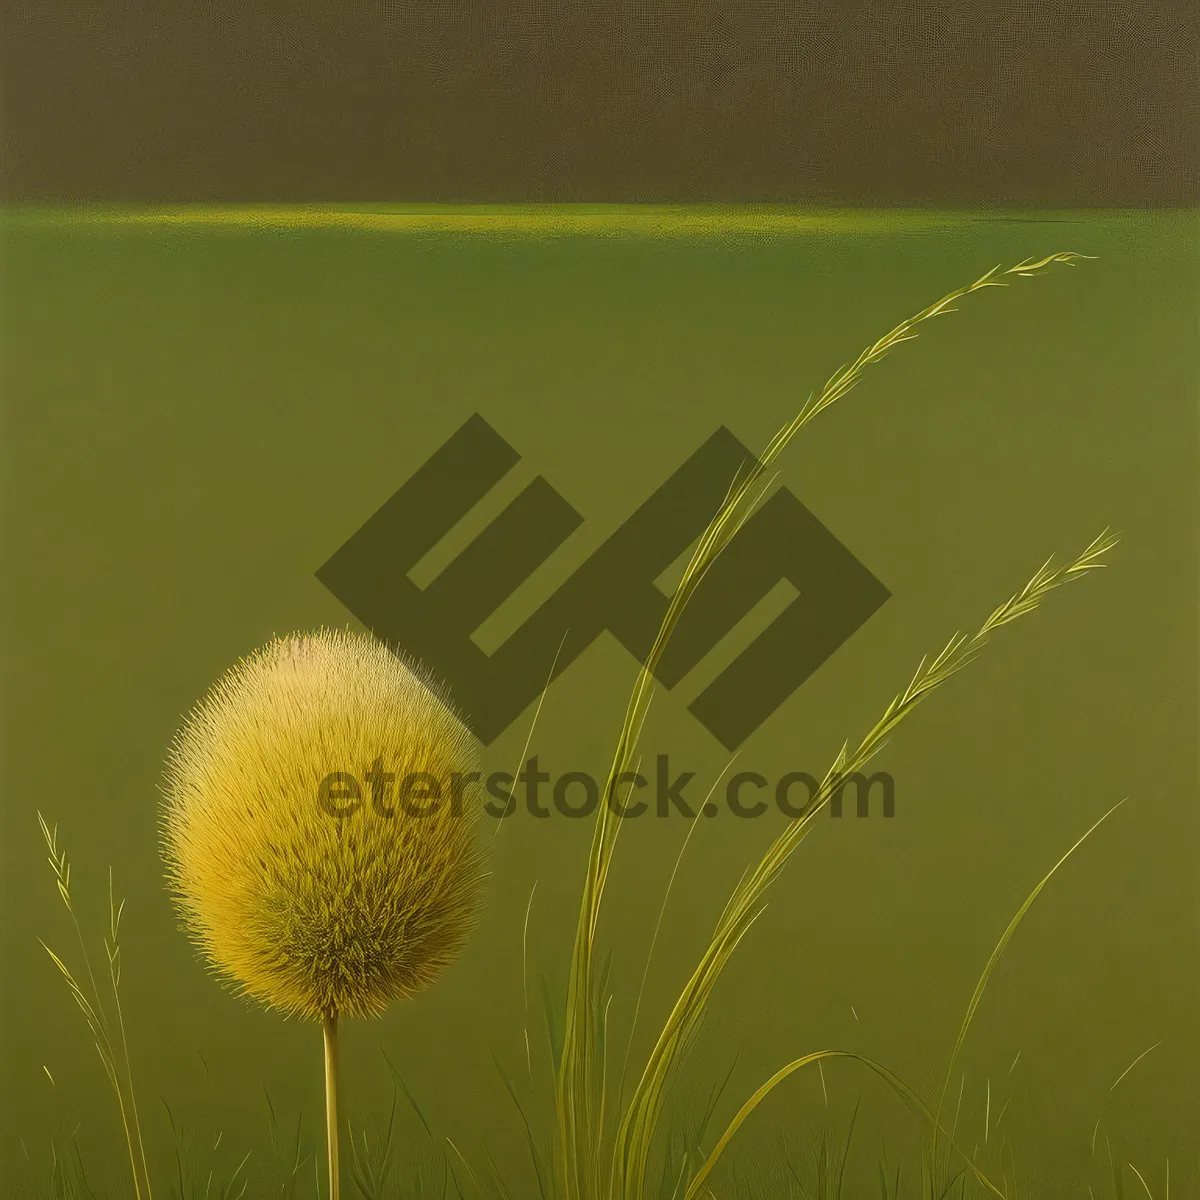 Picture of Teasel Flower Ball in Summer Grass